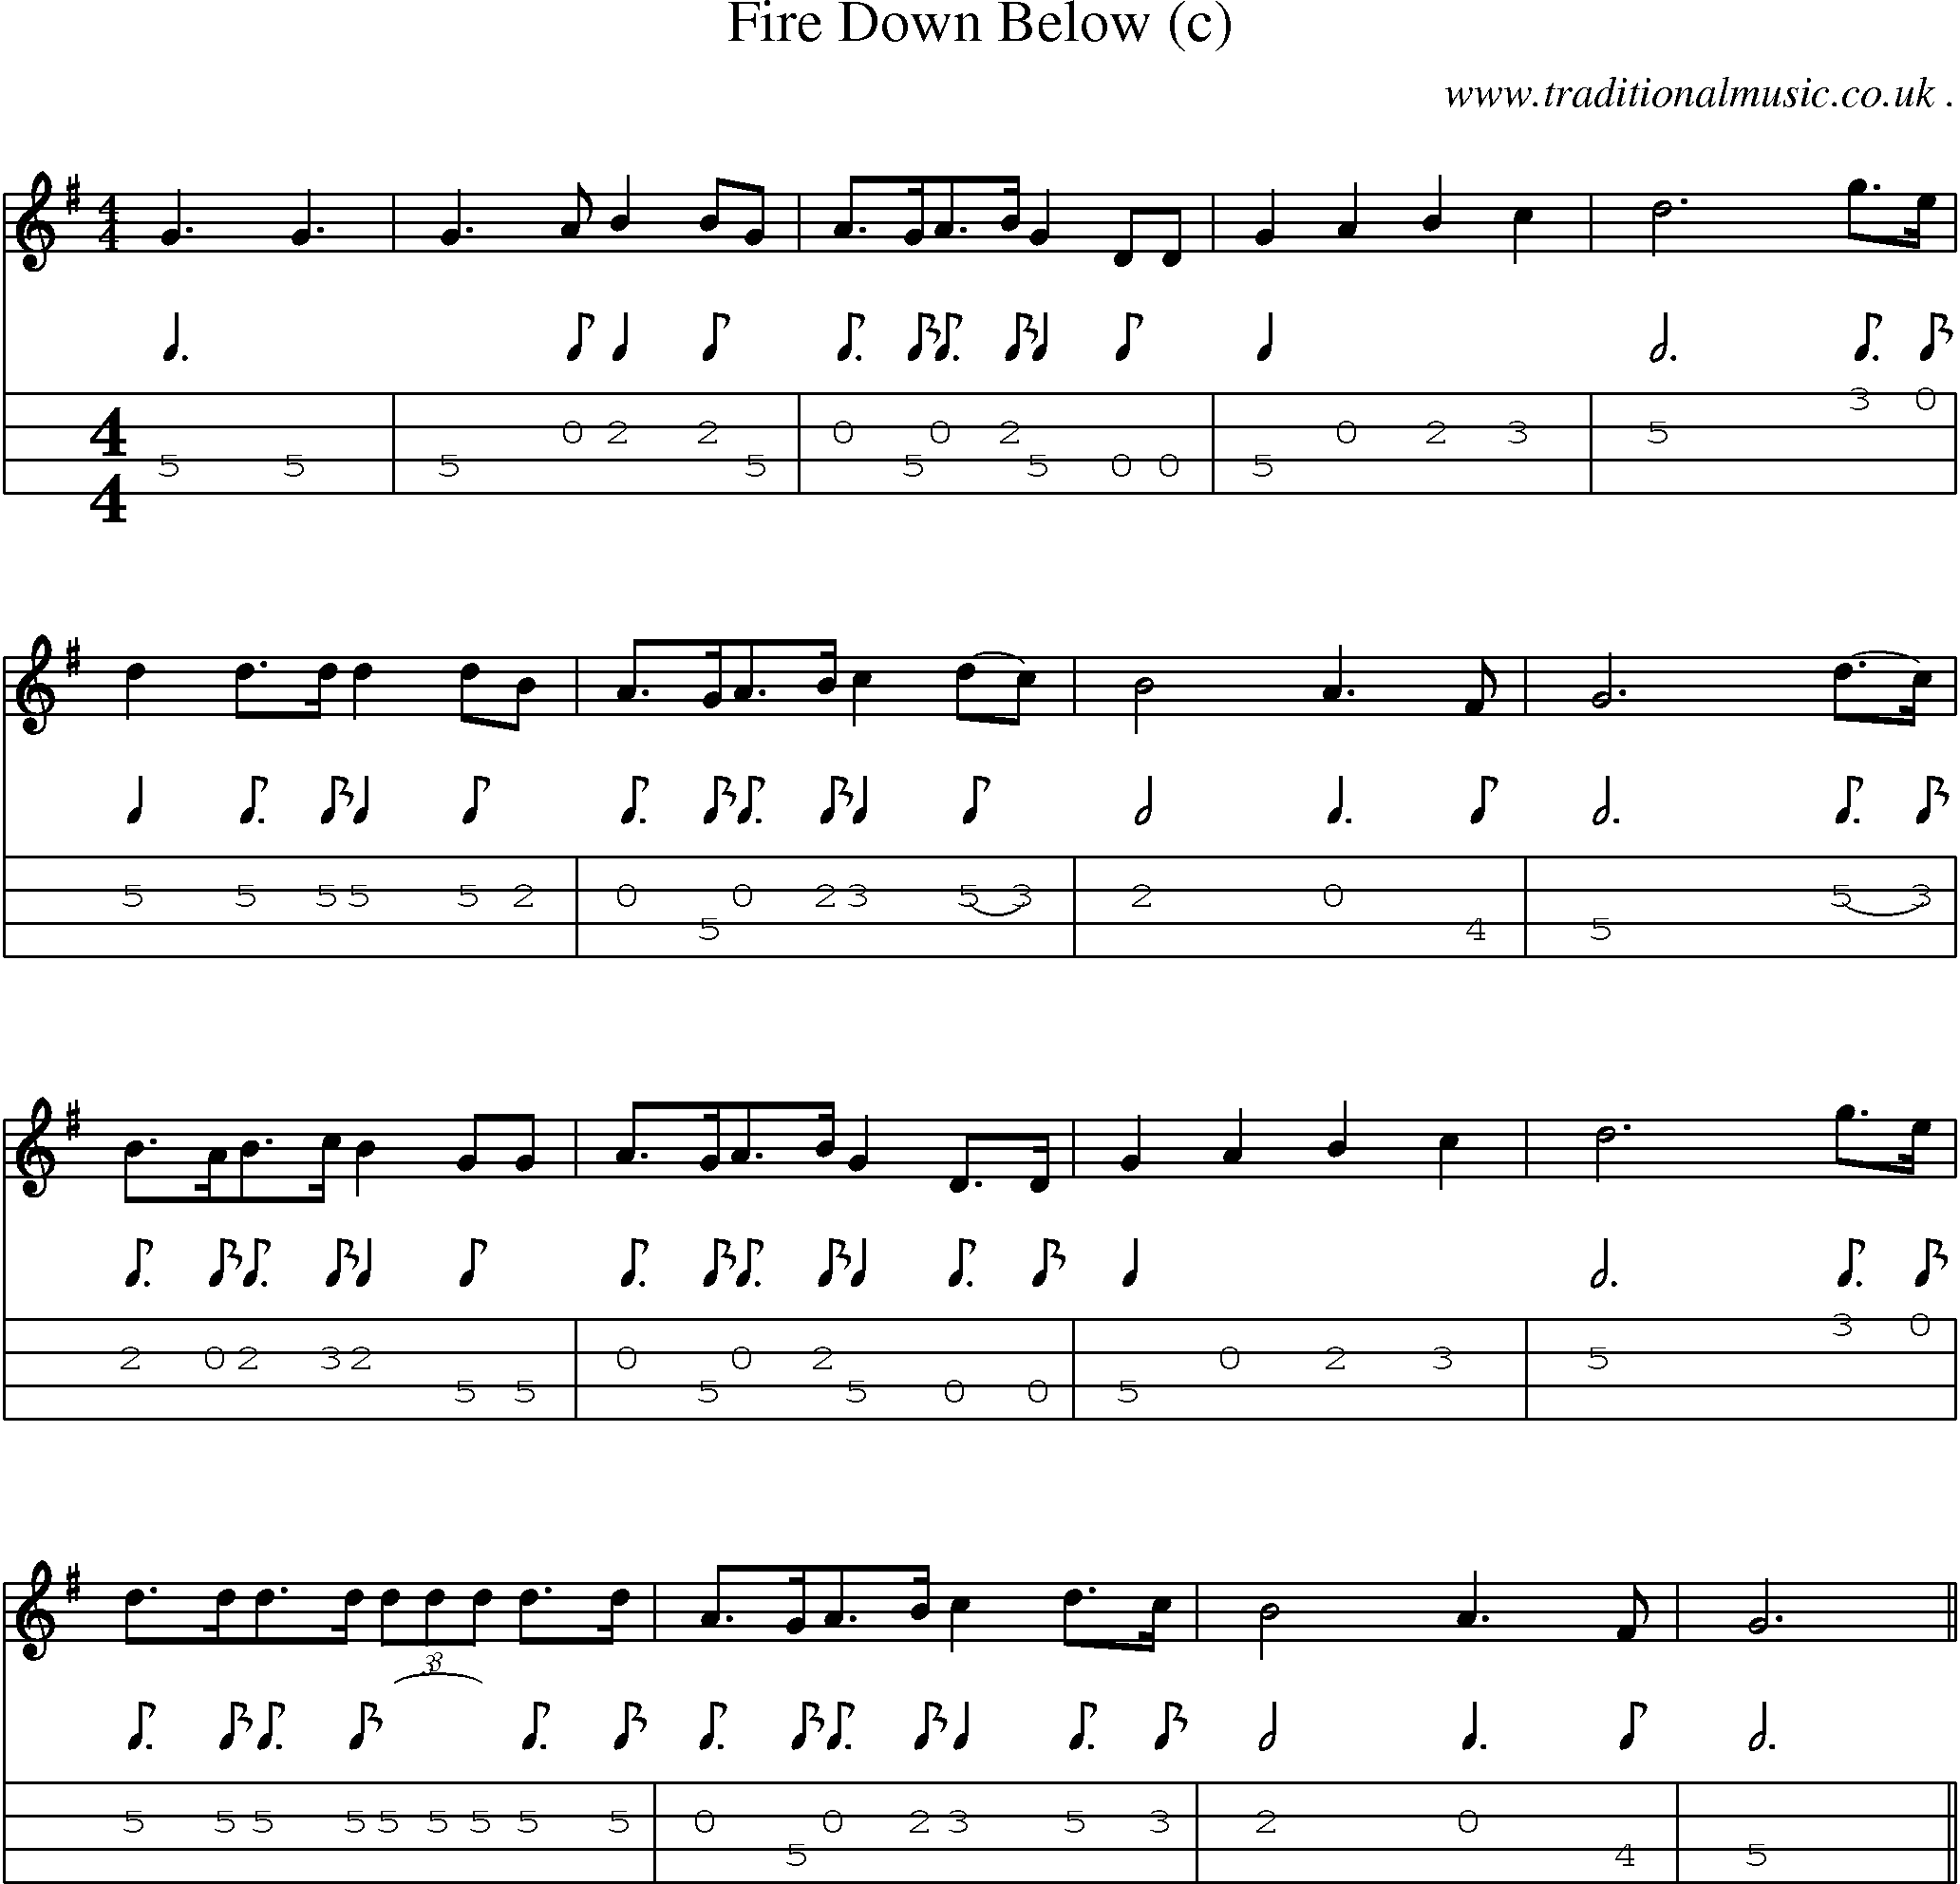 Sheet-Music and Mandolin Tabs for Fire Down Below (c)